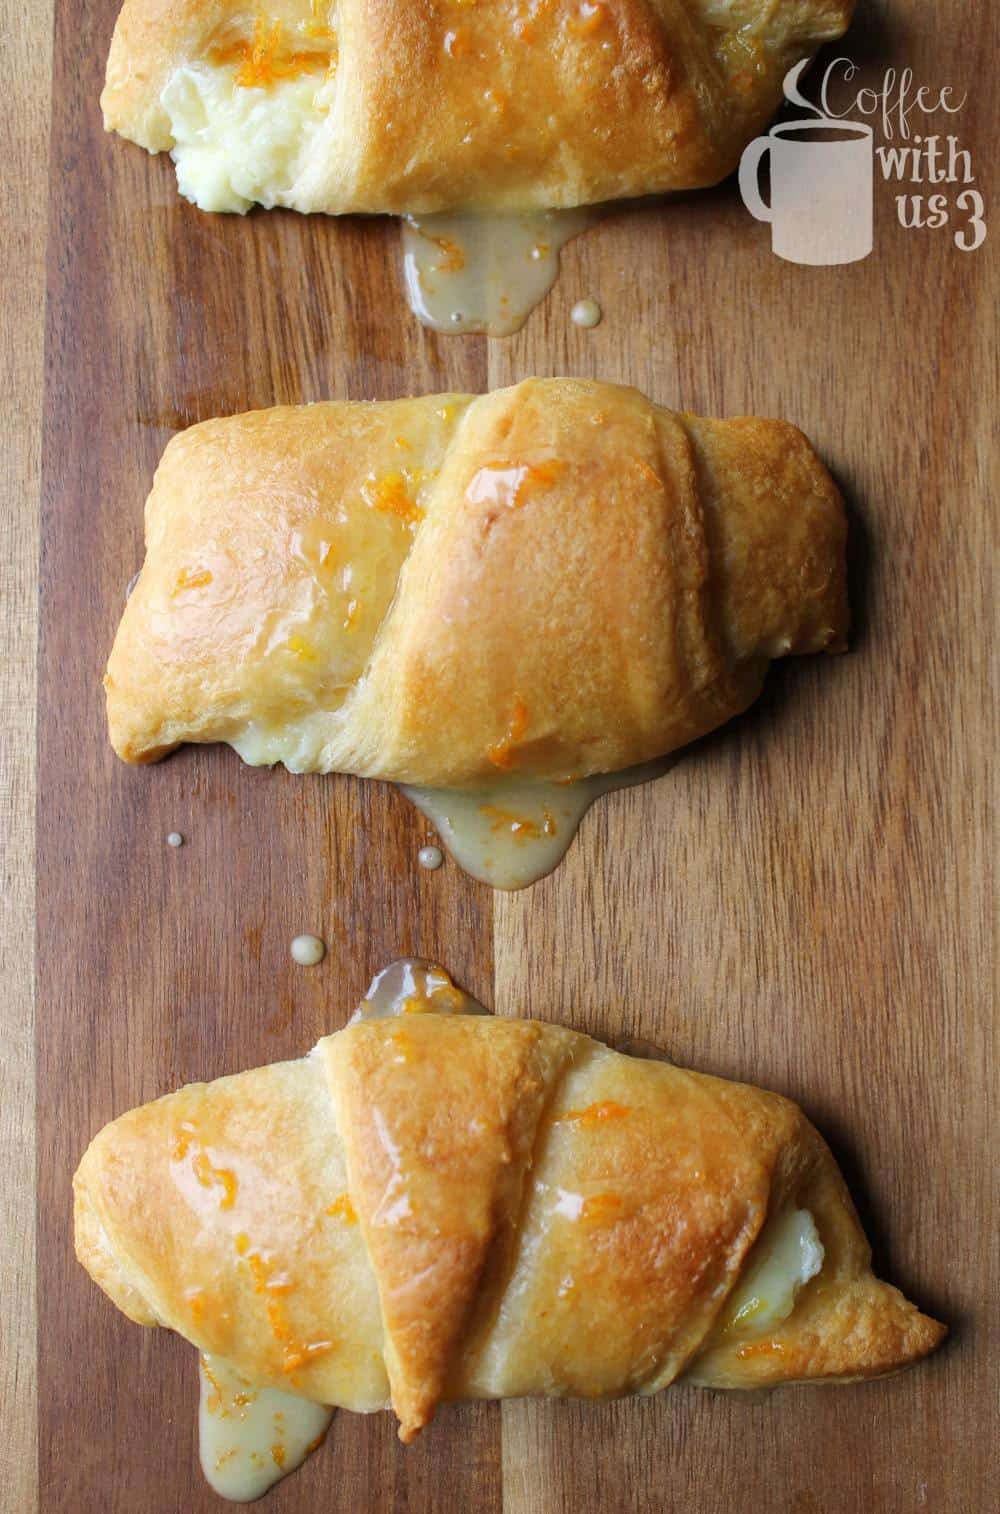 Sweet and delicious Orange Cream Cheese Croissants are a tasty treat that's ready in a flash, by using canned crescent rolls!